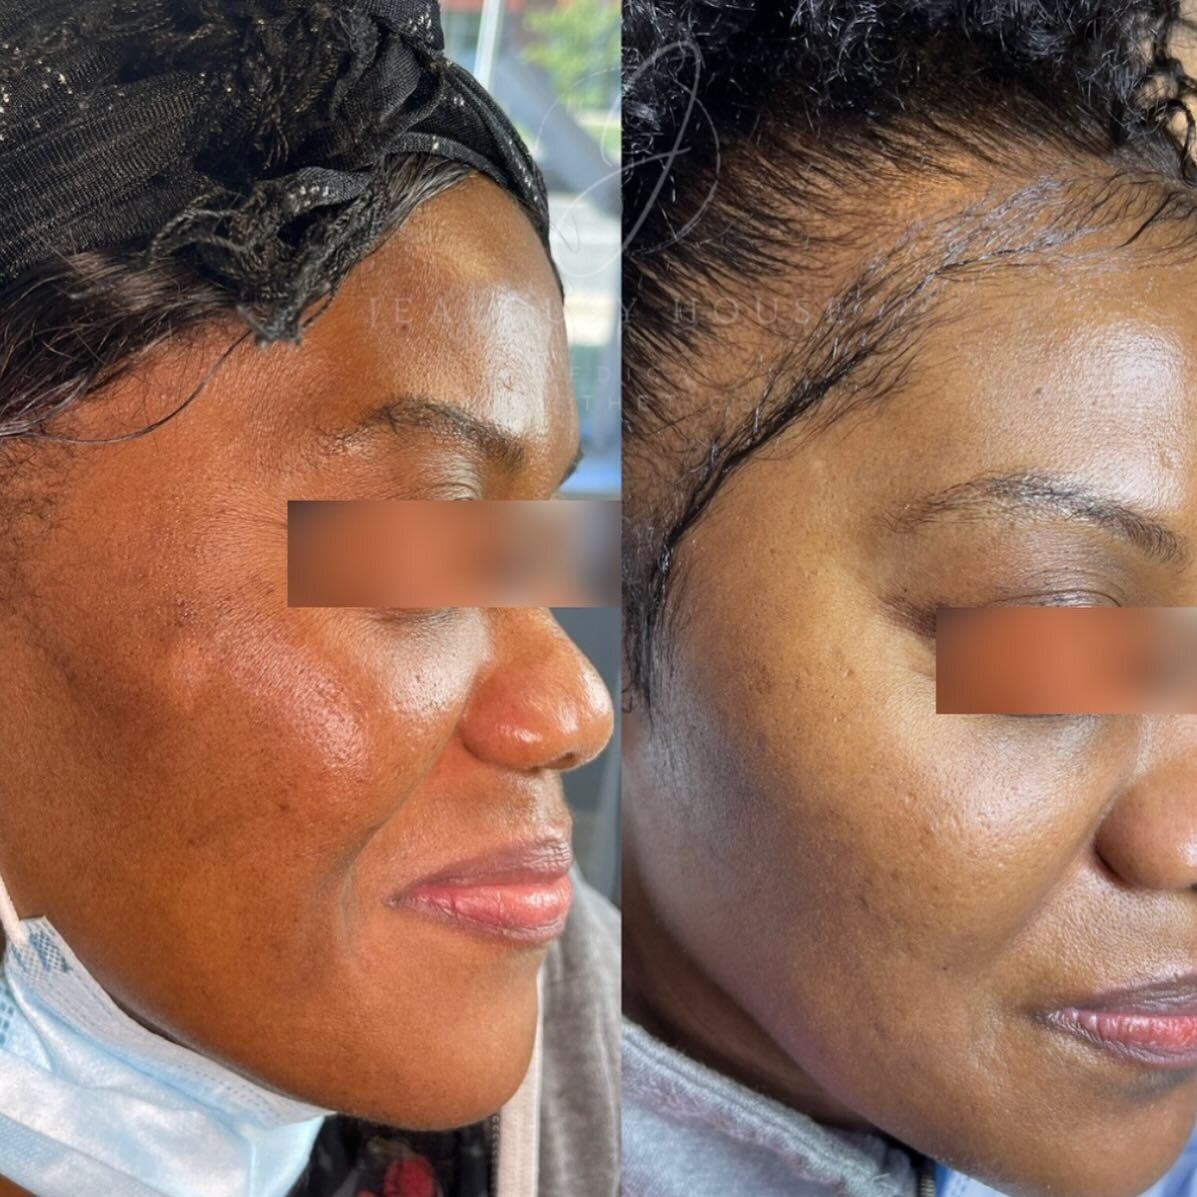 ✨ Say hello to flawless skin with Microneedling! ✨

Struggling with hyperpigmentation and discoloration? Say no more! Our Microneedling treatments are not only safe for dark skin when treated properly but also deliver incredible results! 🙌🏾 Say goo